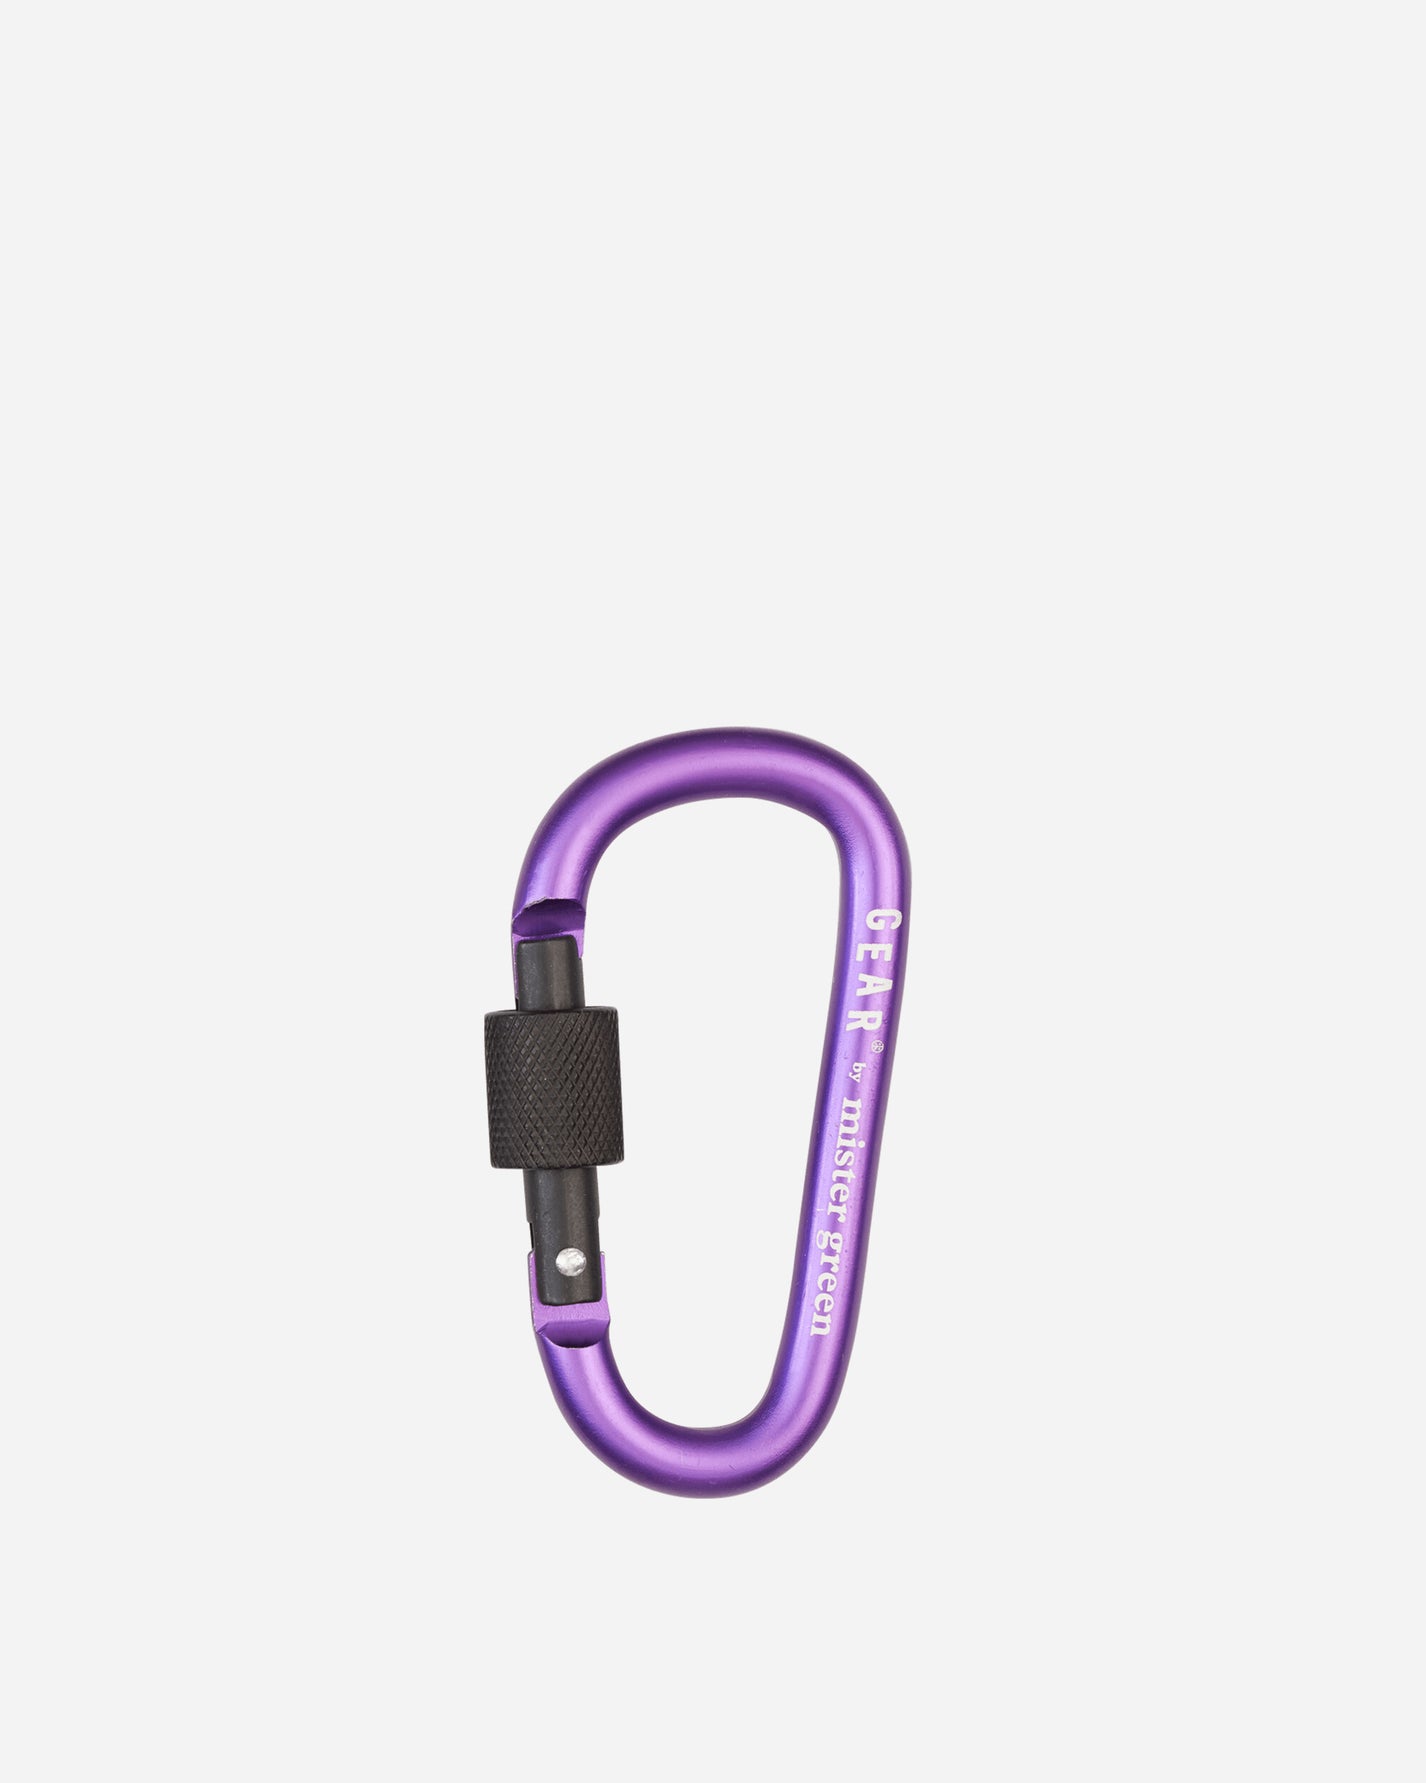 Mister Green Gear Carabiner Purple Small Accessories Keychains MG-X1159 PUR